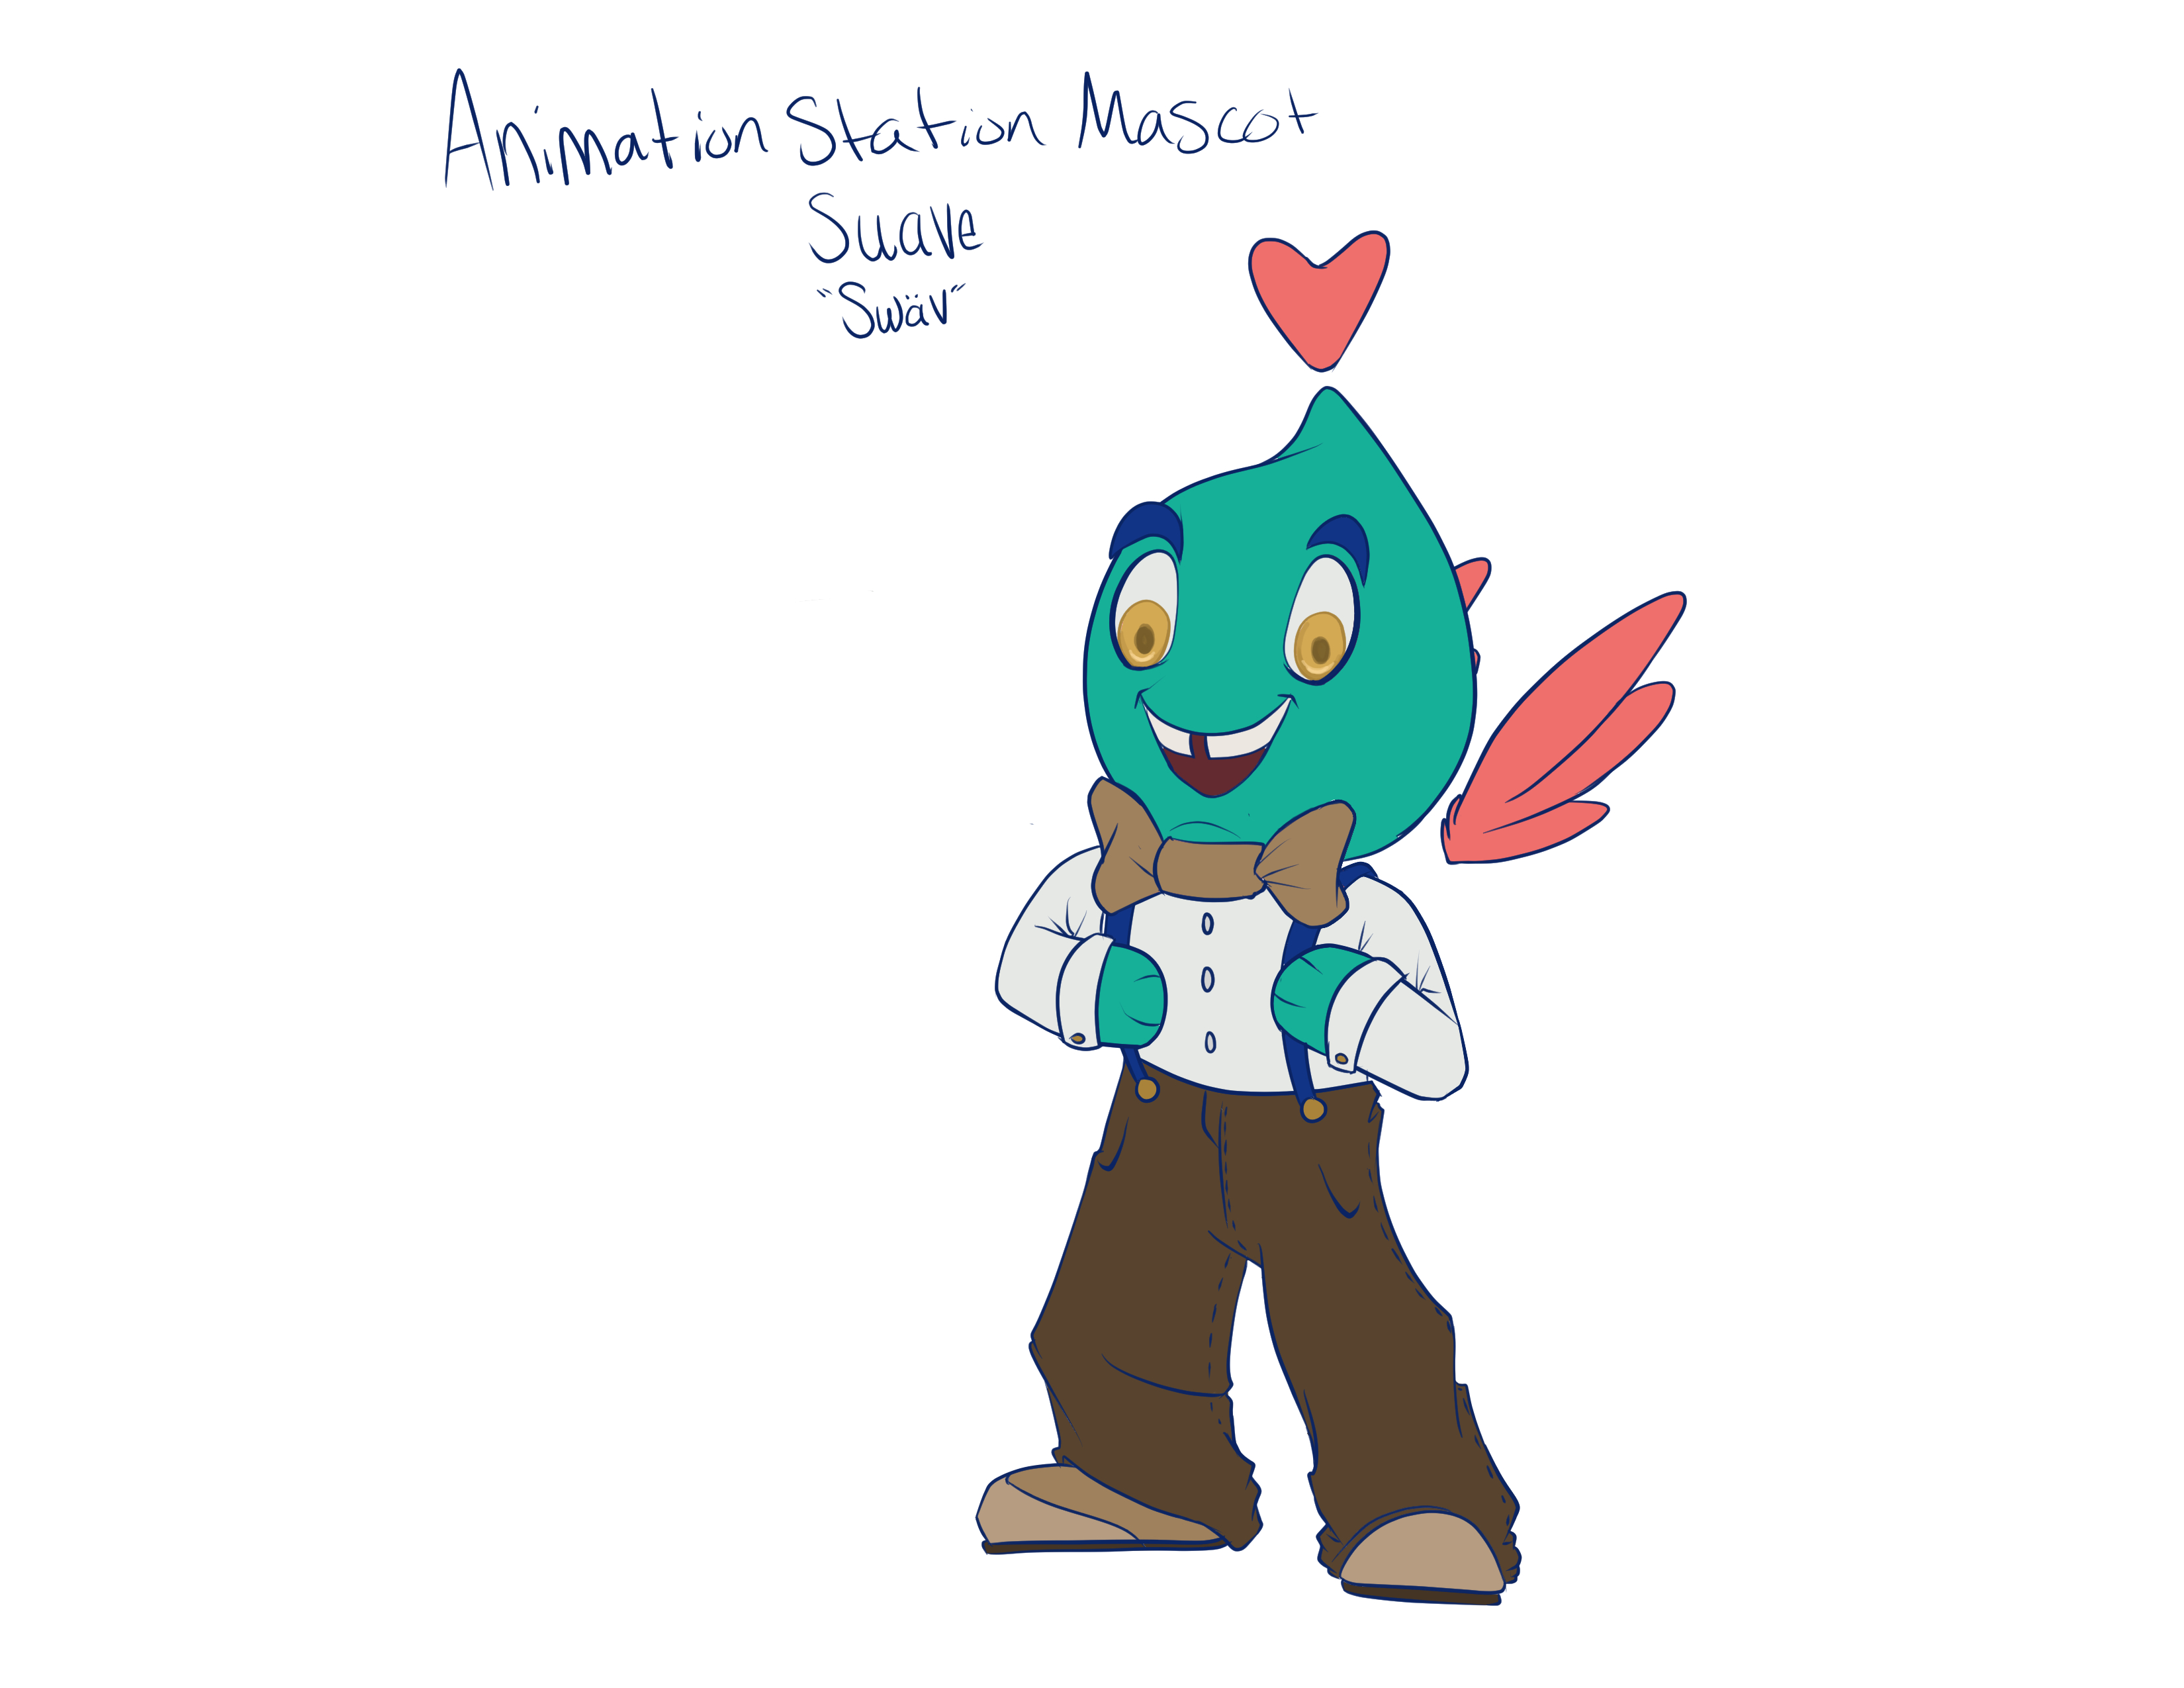 Mascot Swav  / The clean and colored version of the Mascot Swav for Animation Station. This was created with Clip Studio Paint